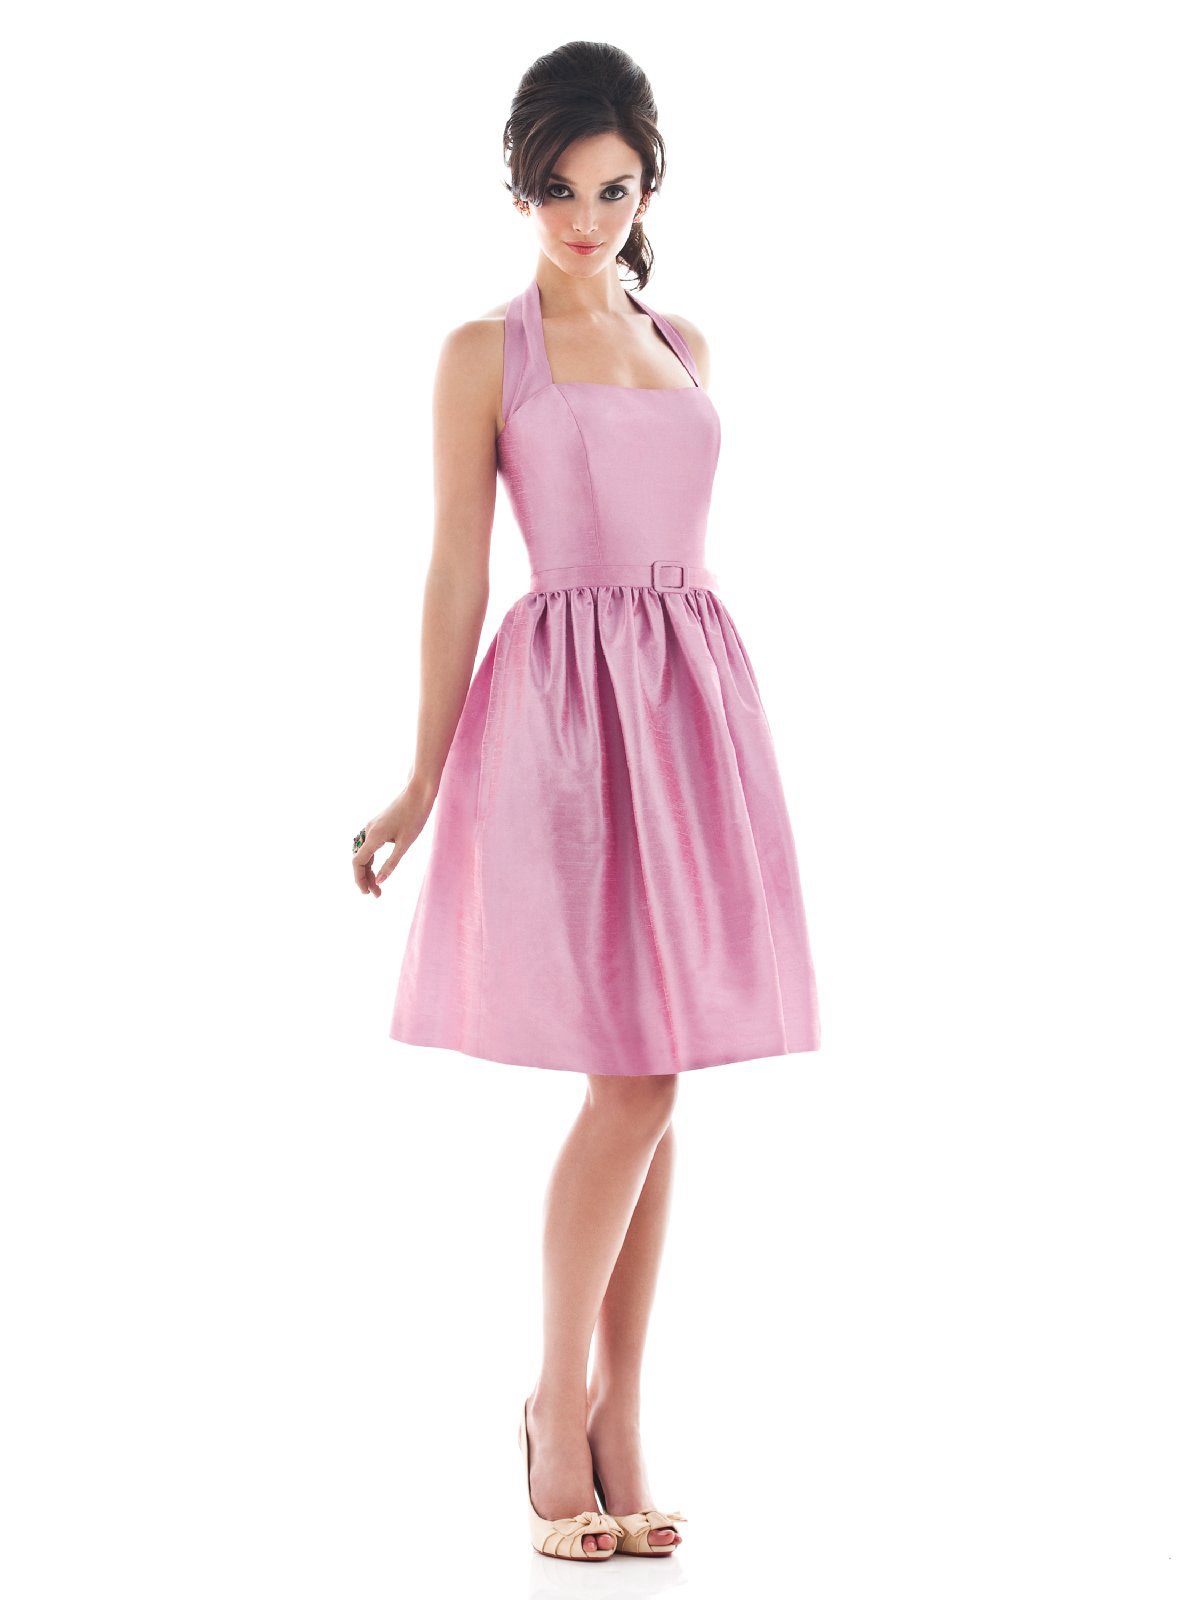 Pink A Line Halter Zipper Knee Length Prom Dresses With Belt And Draped Skirt 